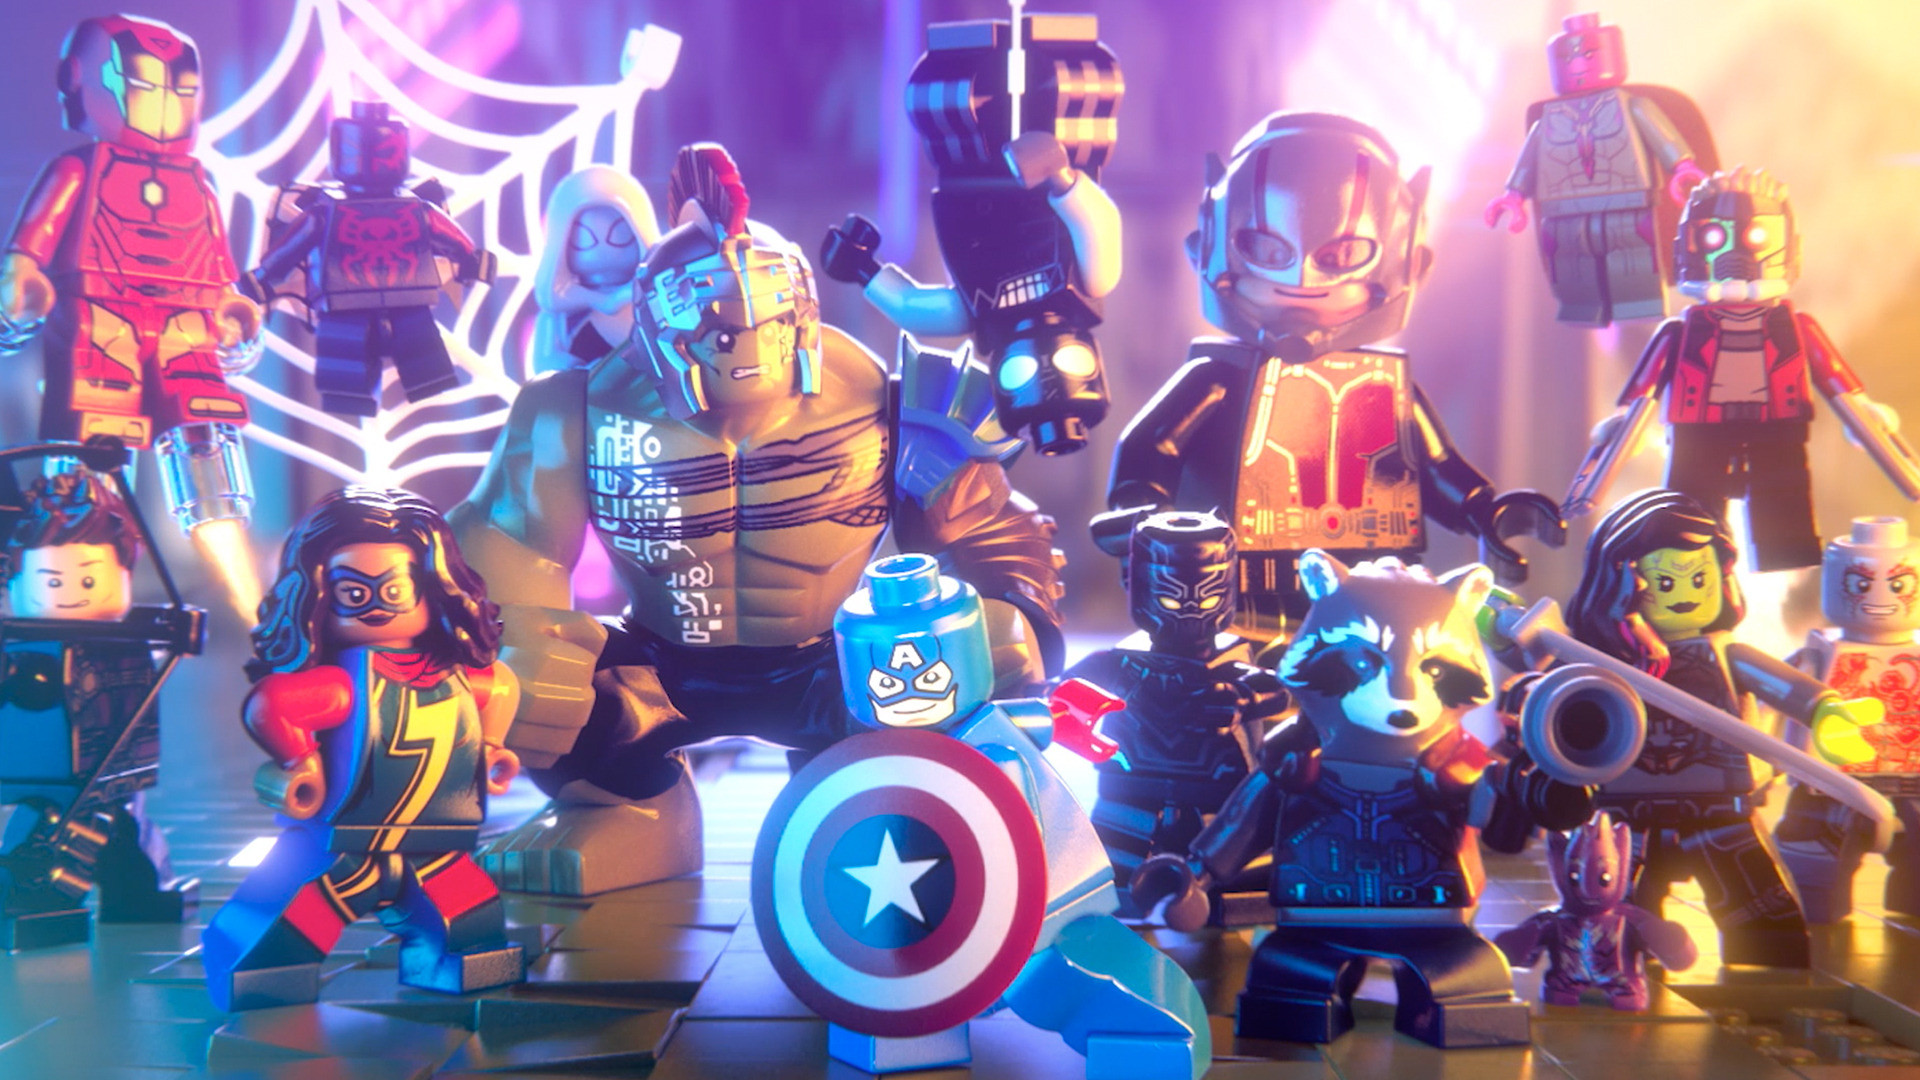 1920x1080 LEGO Marvel Super Heroes HD Wallpapers